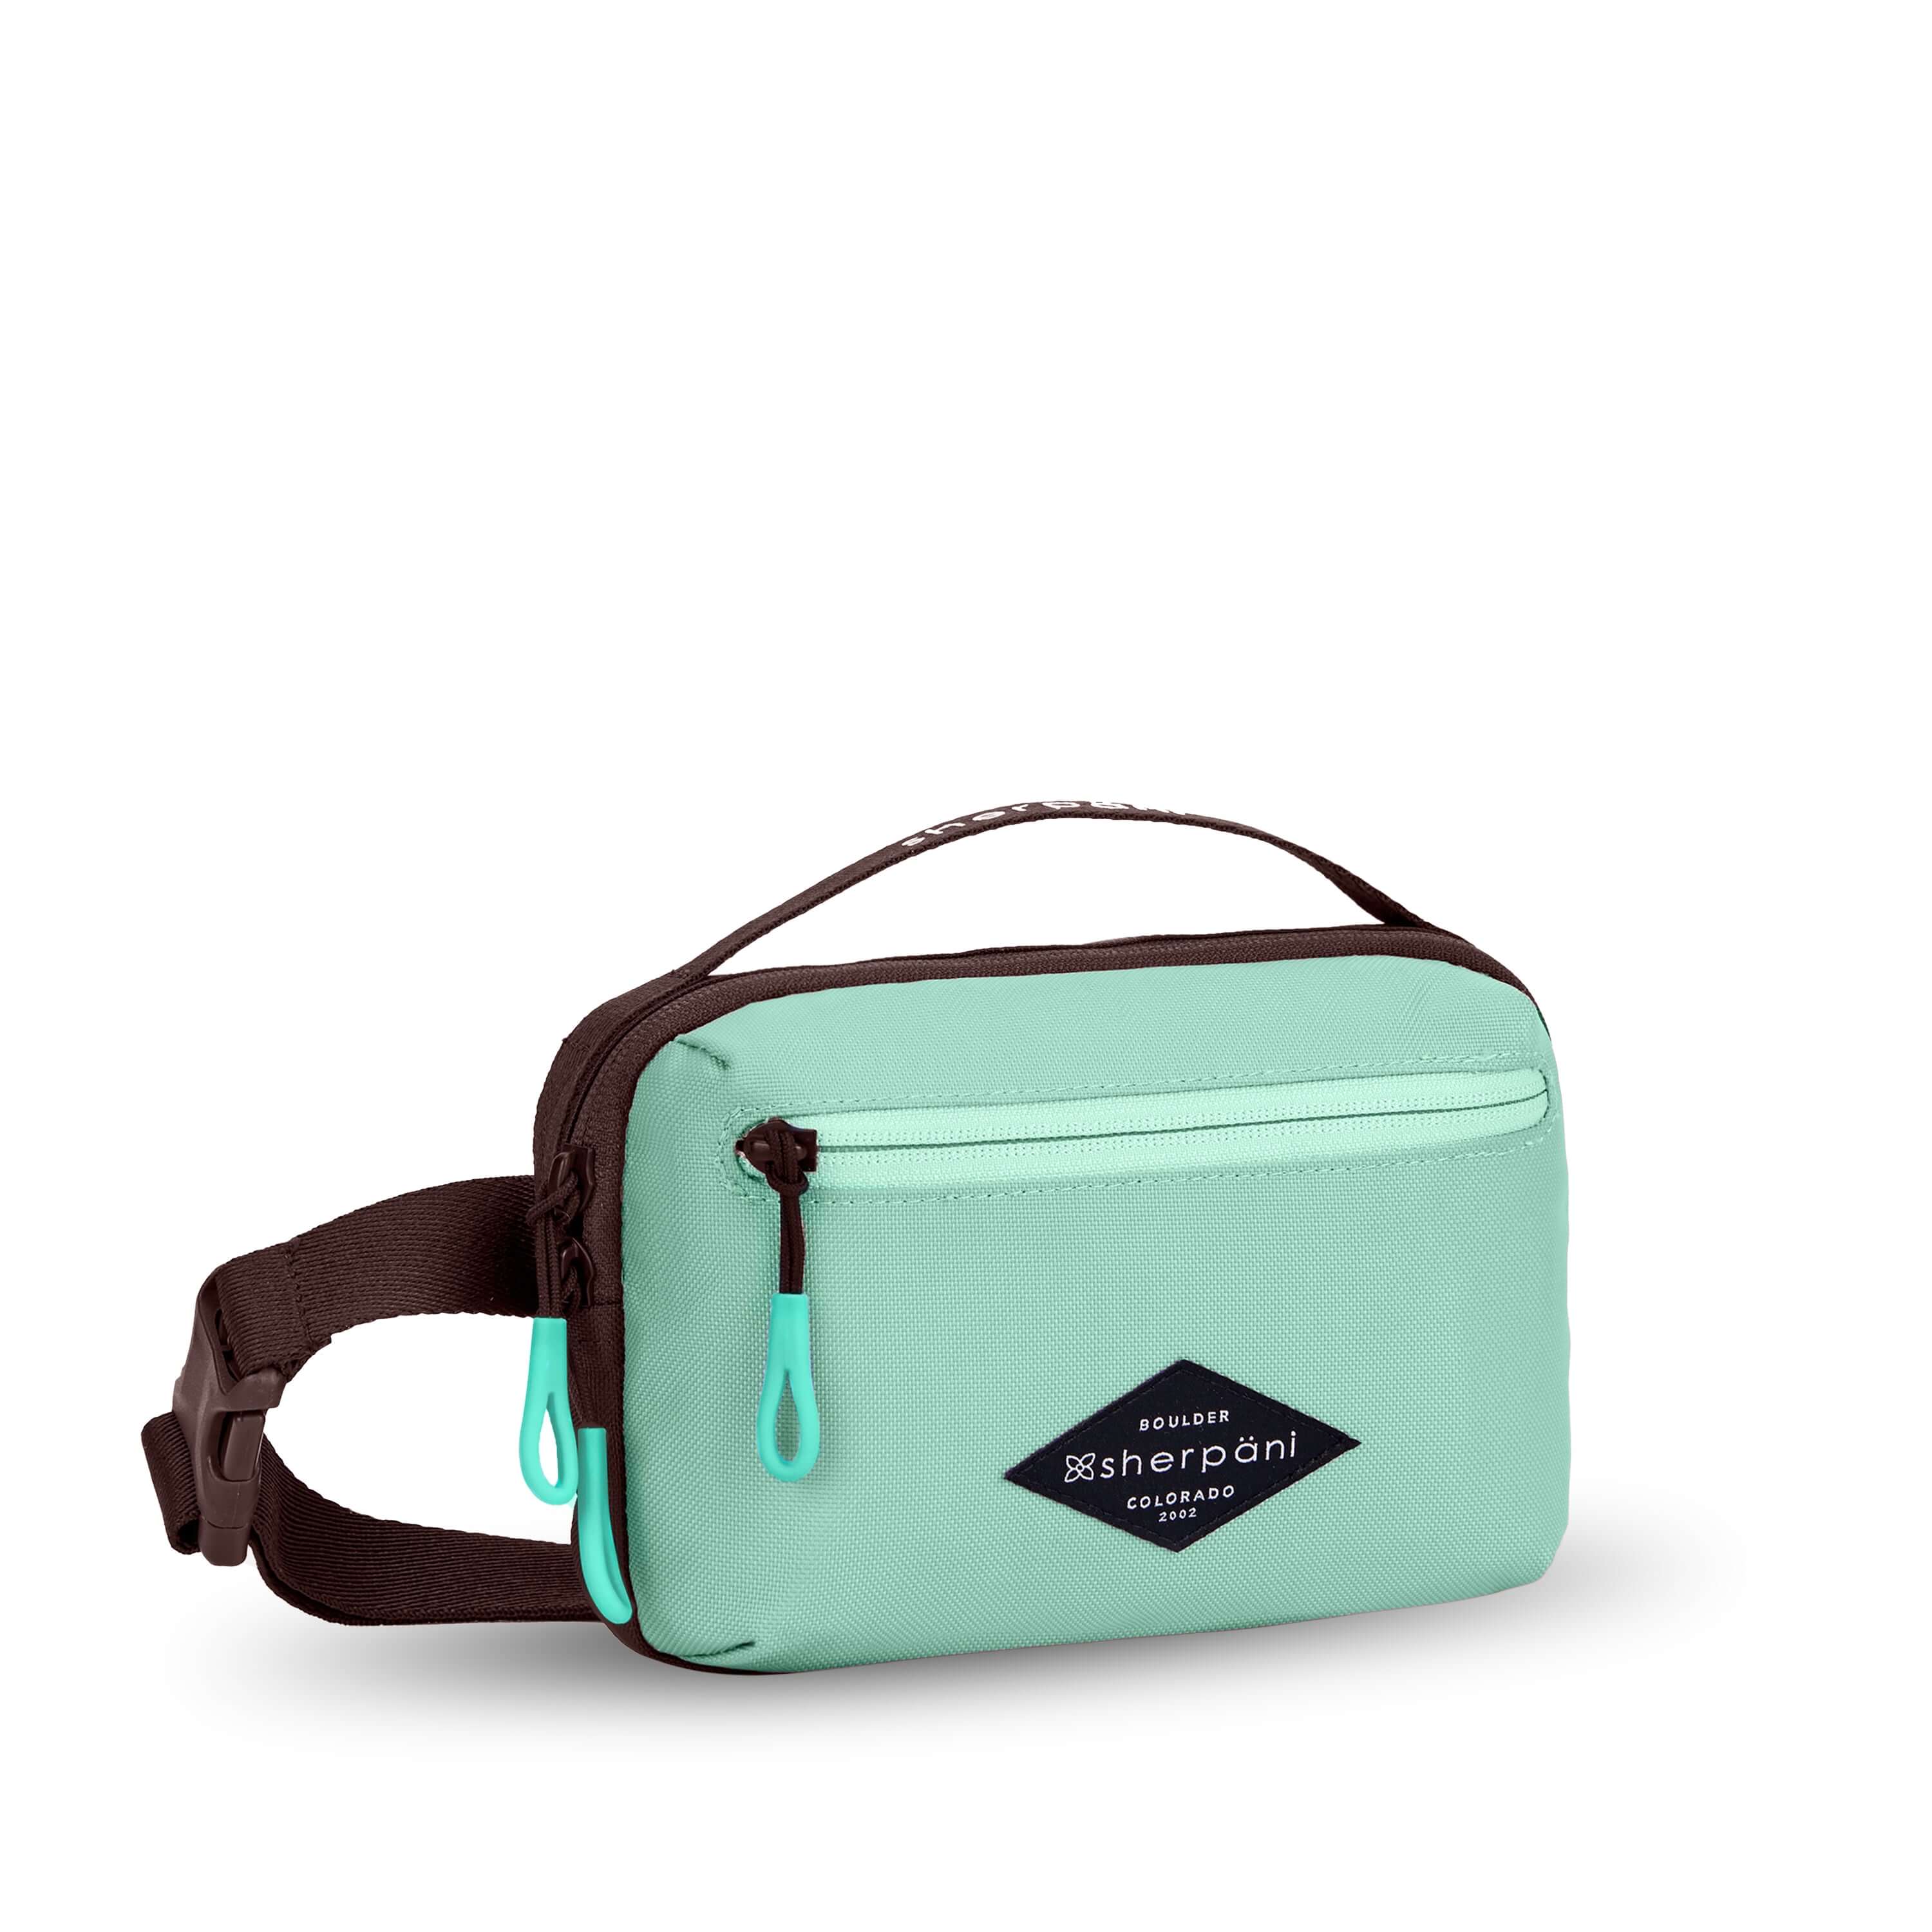 Angled front view of Sherpani’s fanny pack, the Hyk in Seagreen. The bag is two-toned, the front half is light green and the back half is brown. There is an external zipper pocket on the front of the bag. Easy-pull zippers are accented in light green. The fanny pack features an adjustable strap with a buckle.